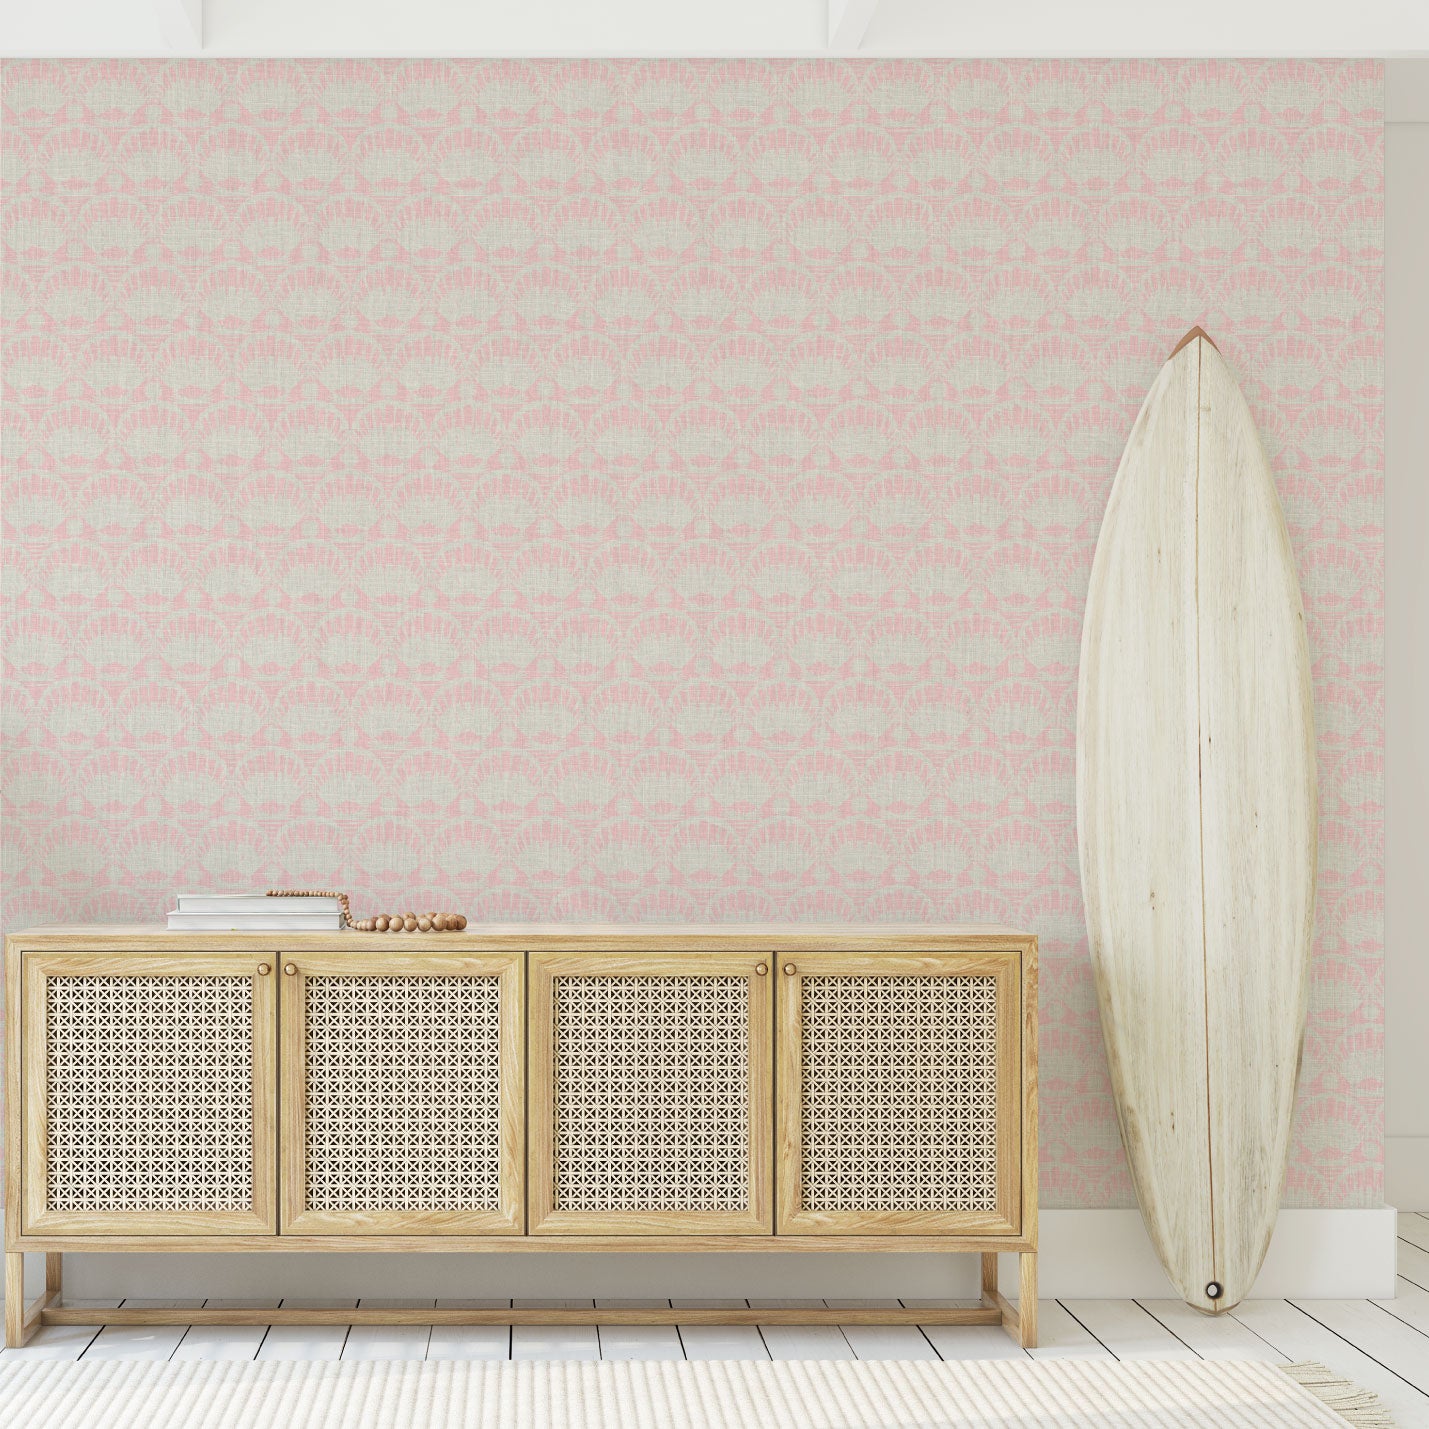 wallpaper seashell horizontal stripe Natural Textured Eco-Friendly Non-toxic High-quality Sustainable practices Sustainability Interior Design Wall covering custom tailor-made retro chic tropical bespoke nature Seaside Coastal Seashore Waterfront Vacation home styling Retreat Relaxed beach vibes Beach cottage Shoreline Oceanfront Nautical pastel subtle baby nursery light pink white soft linen